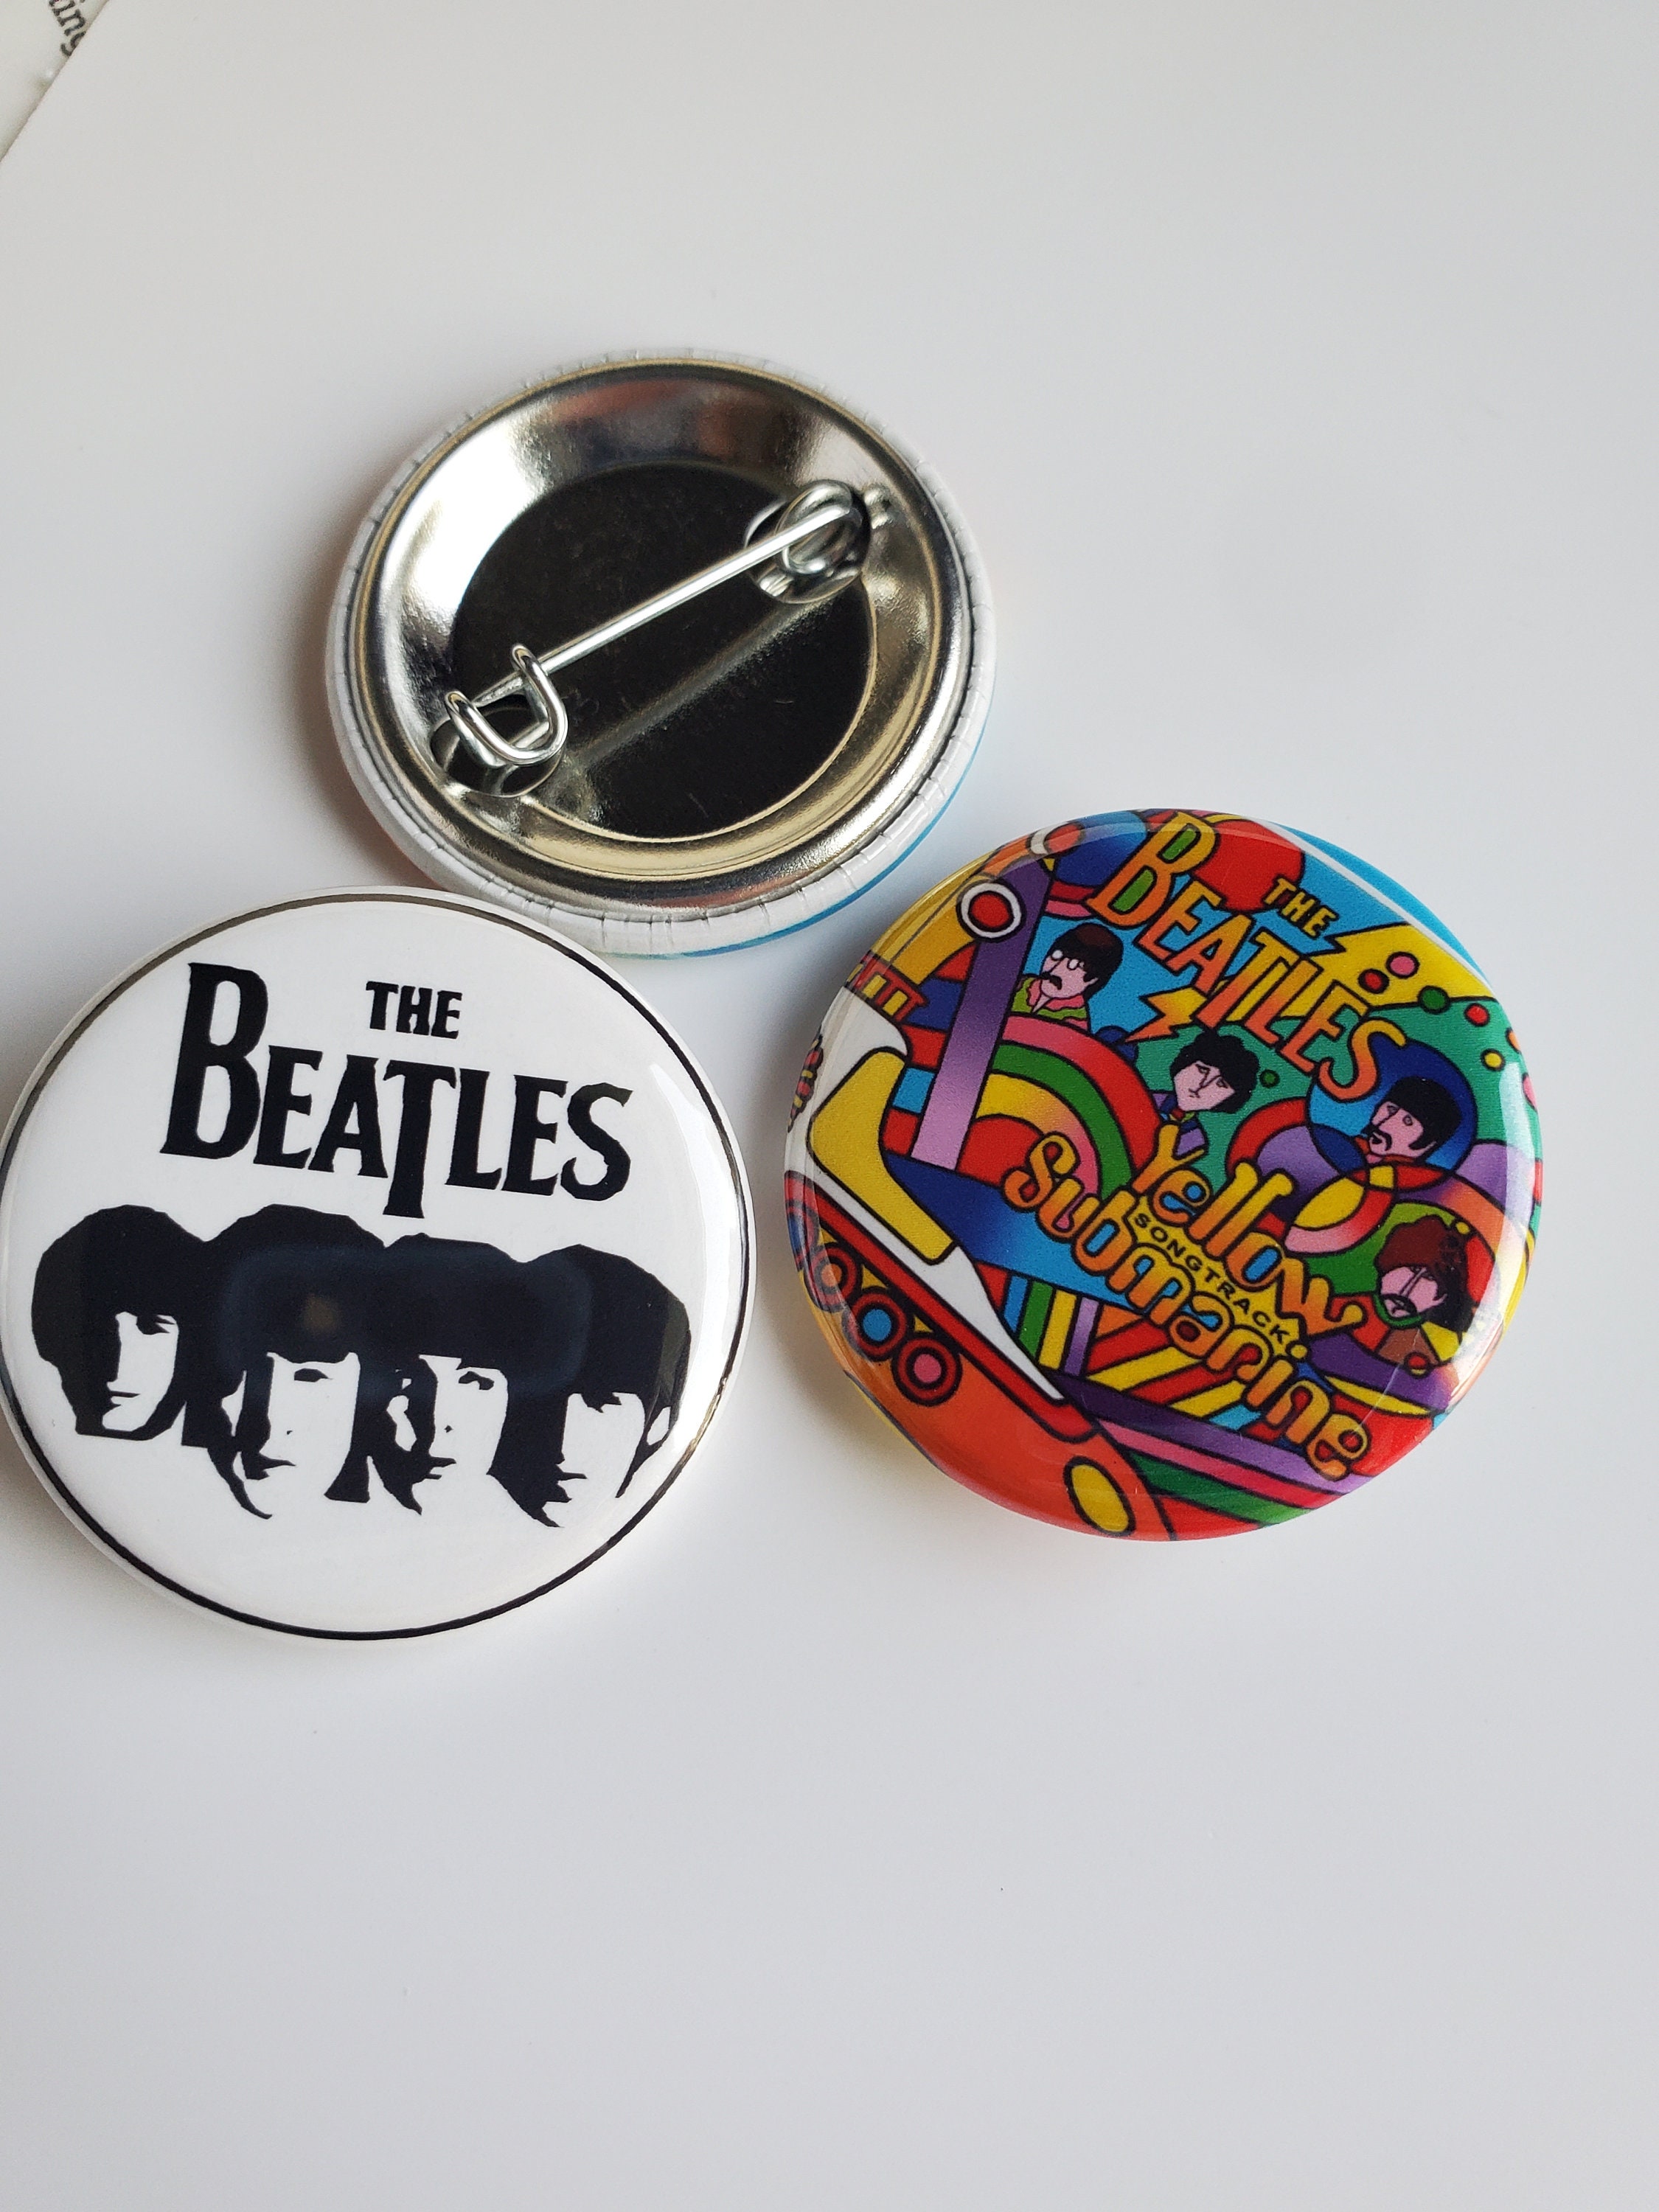 Classic Rock Pins, Pink Floyd, The Doors, Rolling Stones, The Beatles, LED Zepplin, Band Pins, Band Logos, Custom Pins, Custom Buttons